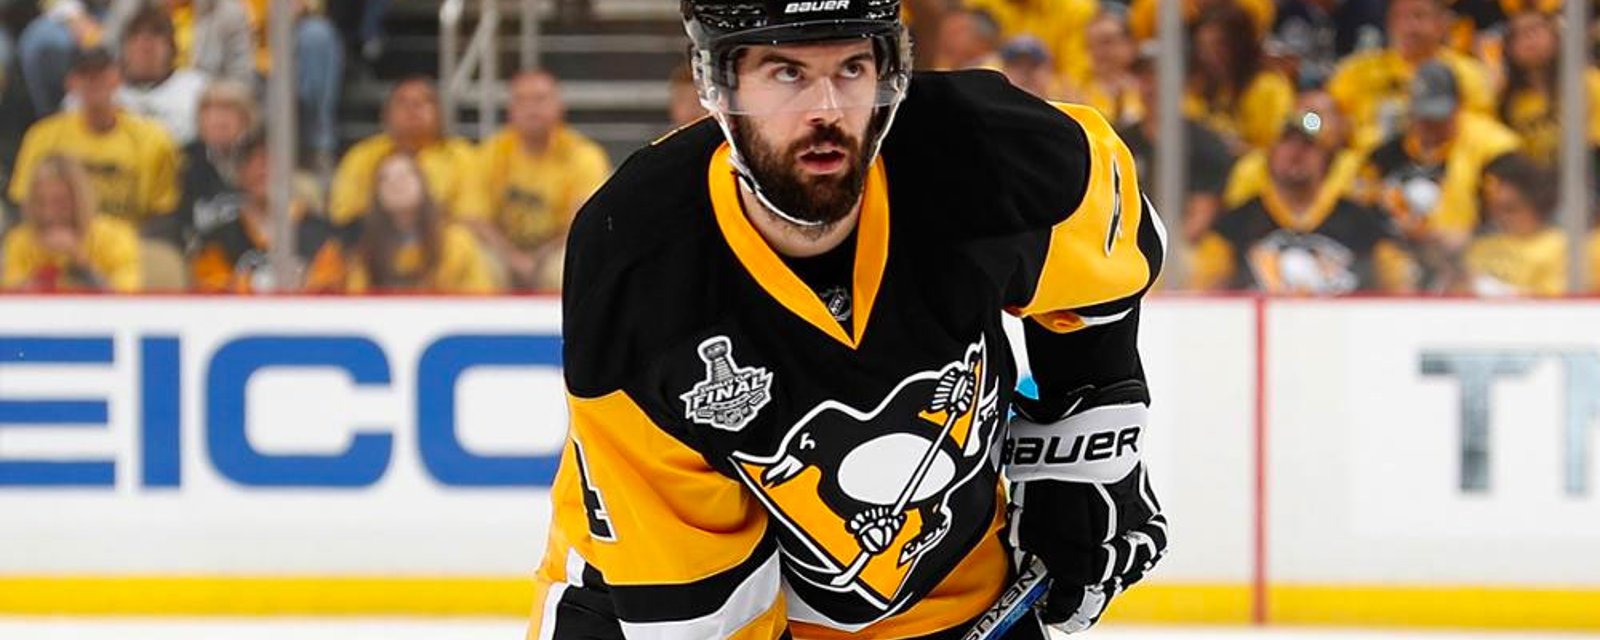 Penguins lose two players long-term, including top blueliner Justin Schultz